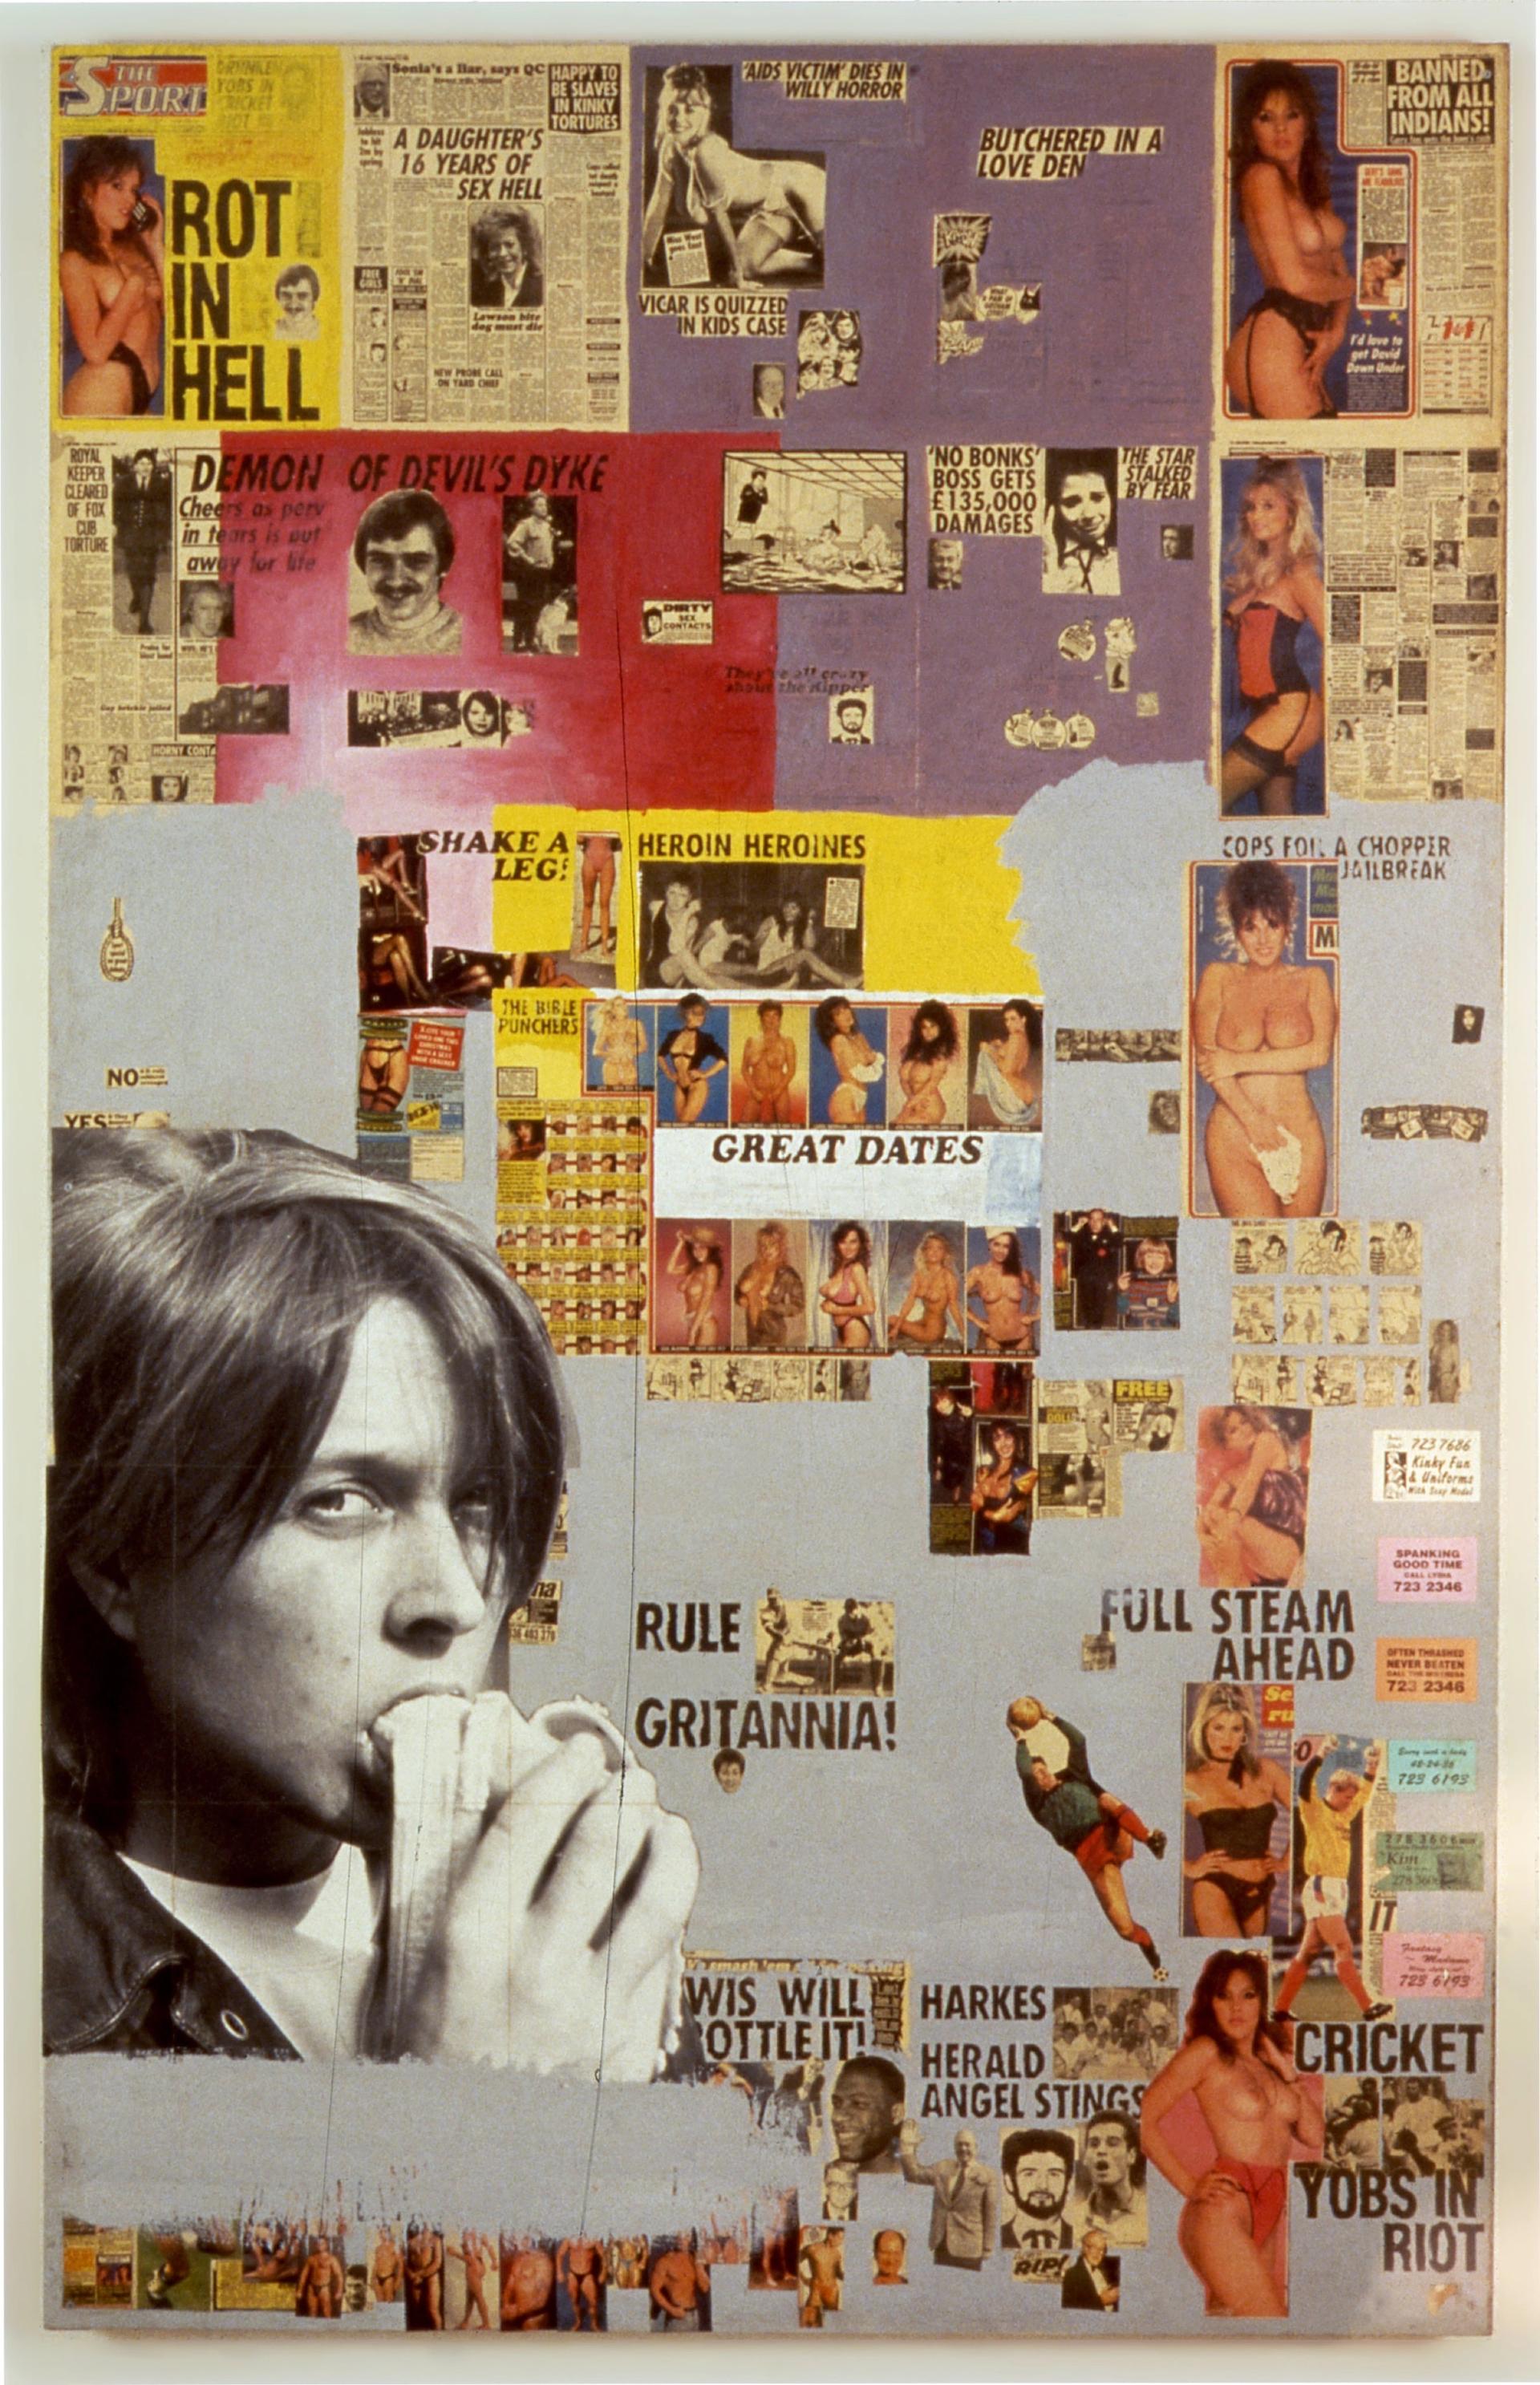 Sarah Lucas, "Laid in Japan," 1991. Courtesy of Sadie Coles HQ and White Cube